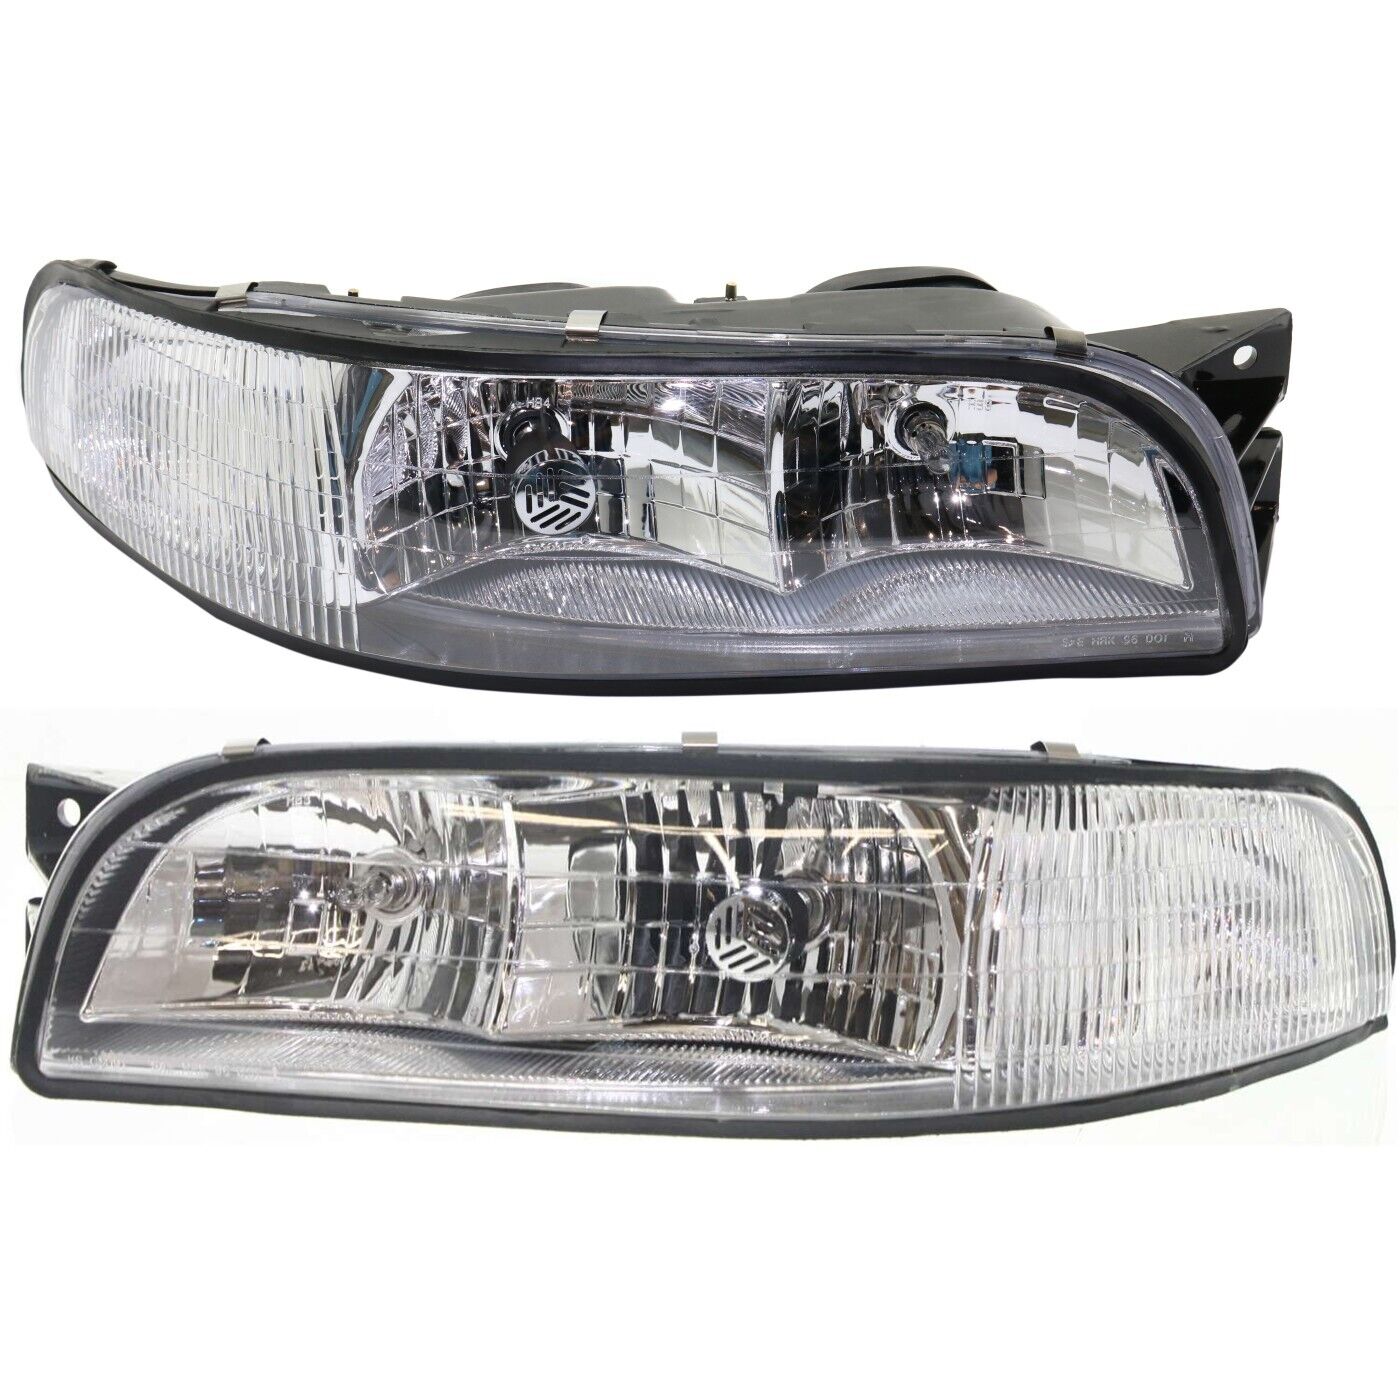 Headlight Set For 1997-1999 Buick LeSabre Left Right With Bulb and Corner Light